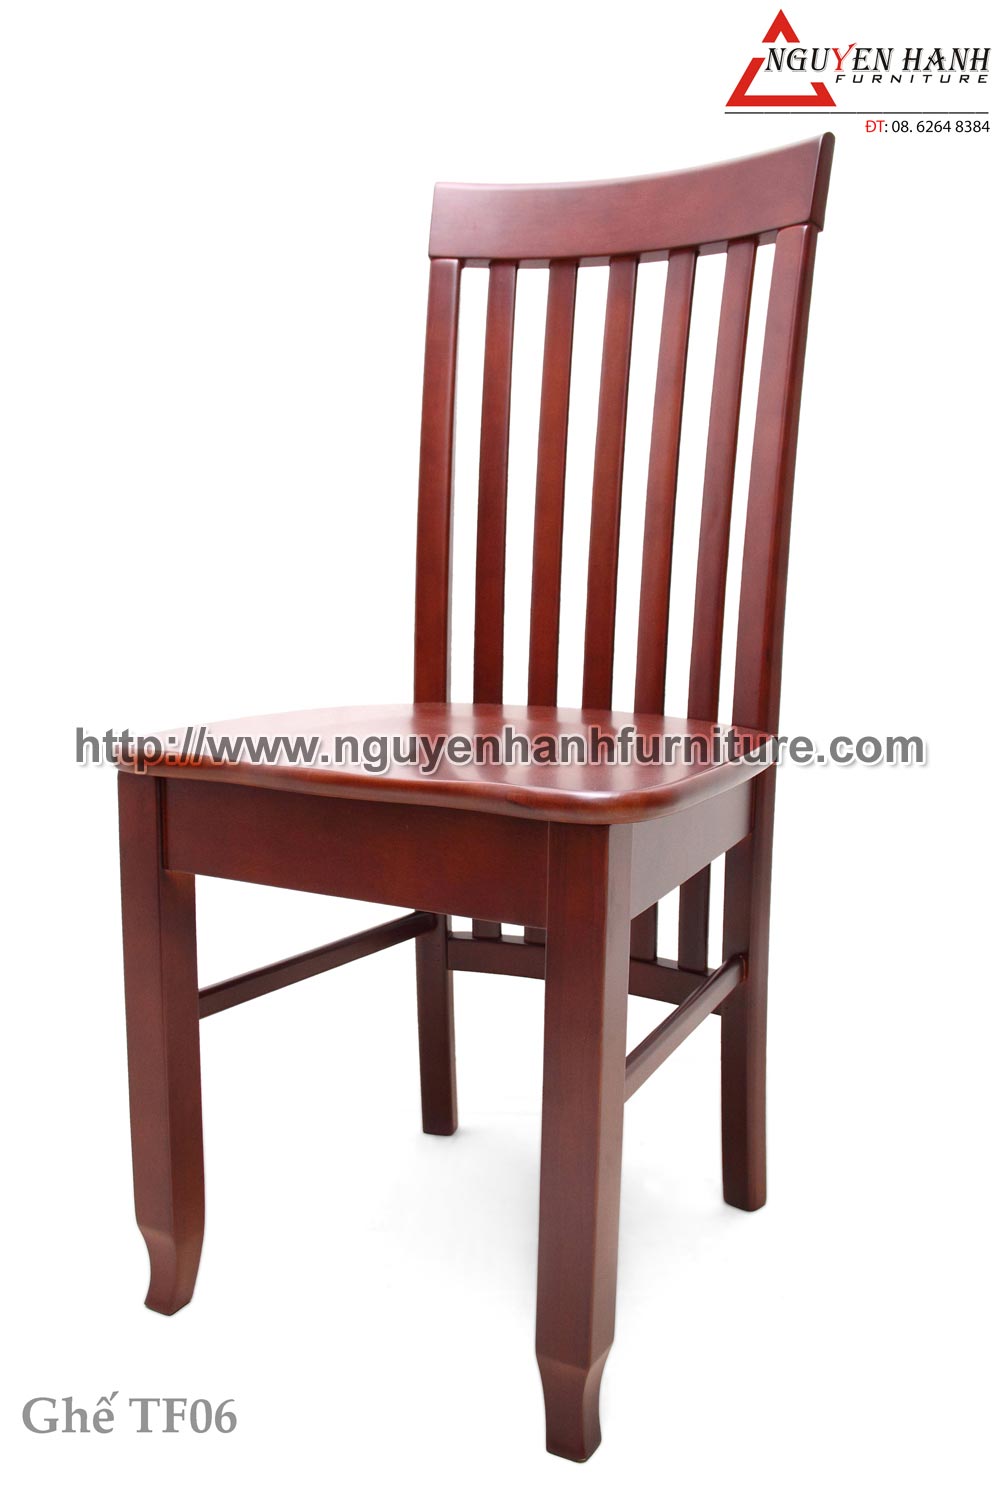 Name product: TF06 chair - Dimensions:  - Description: Wood natural rubber